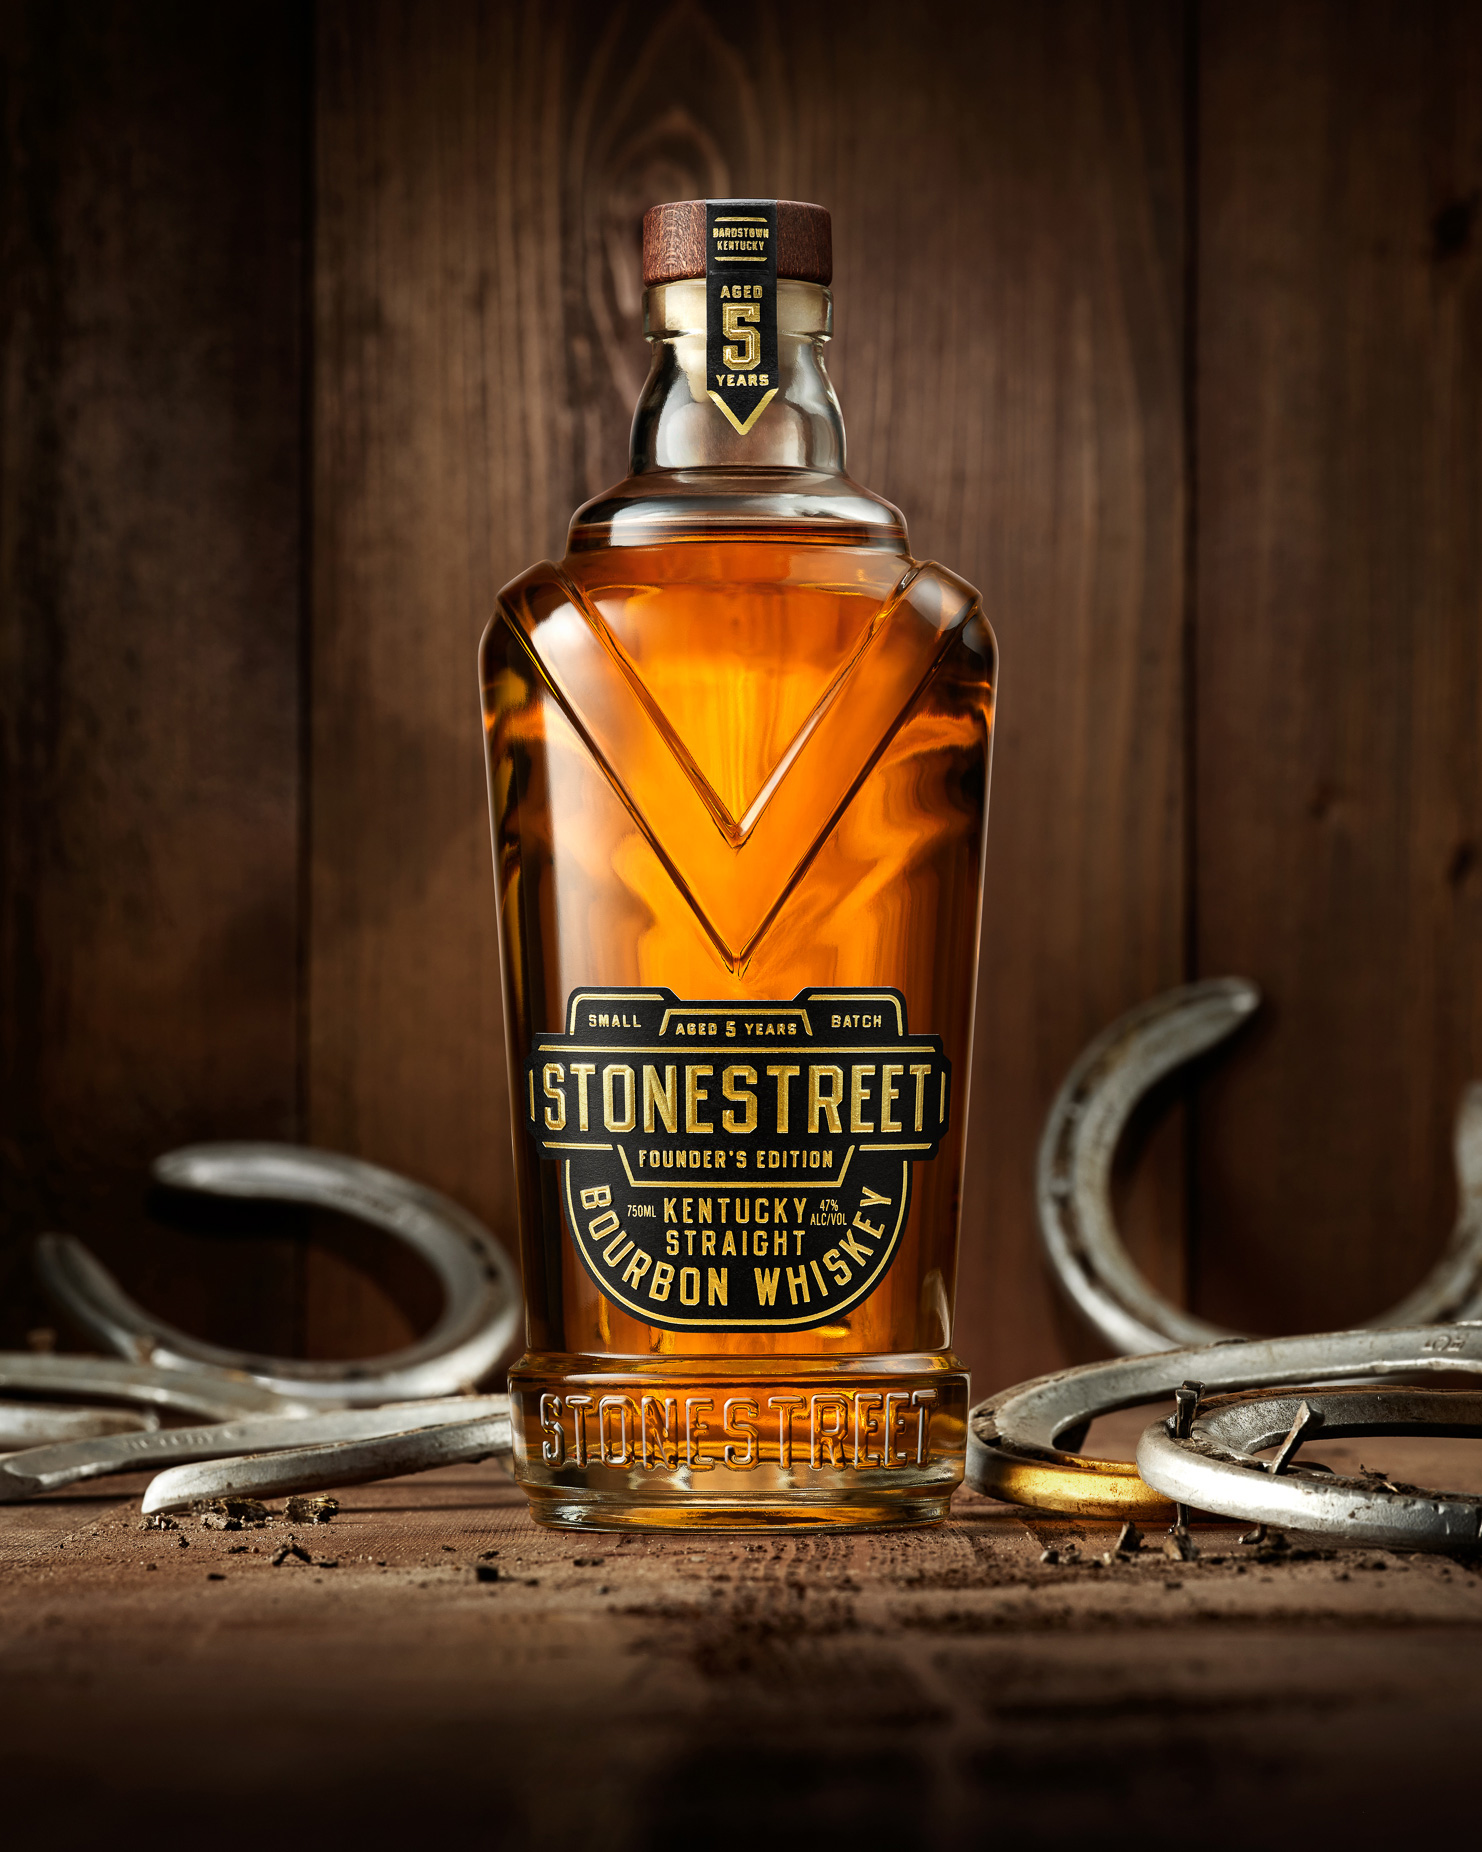 Chad Michael Studio Develops Packaging and Label Design for Stone Street New Bourbon Founder’s Edition